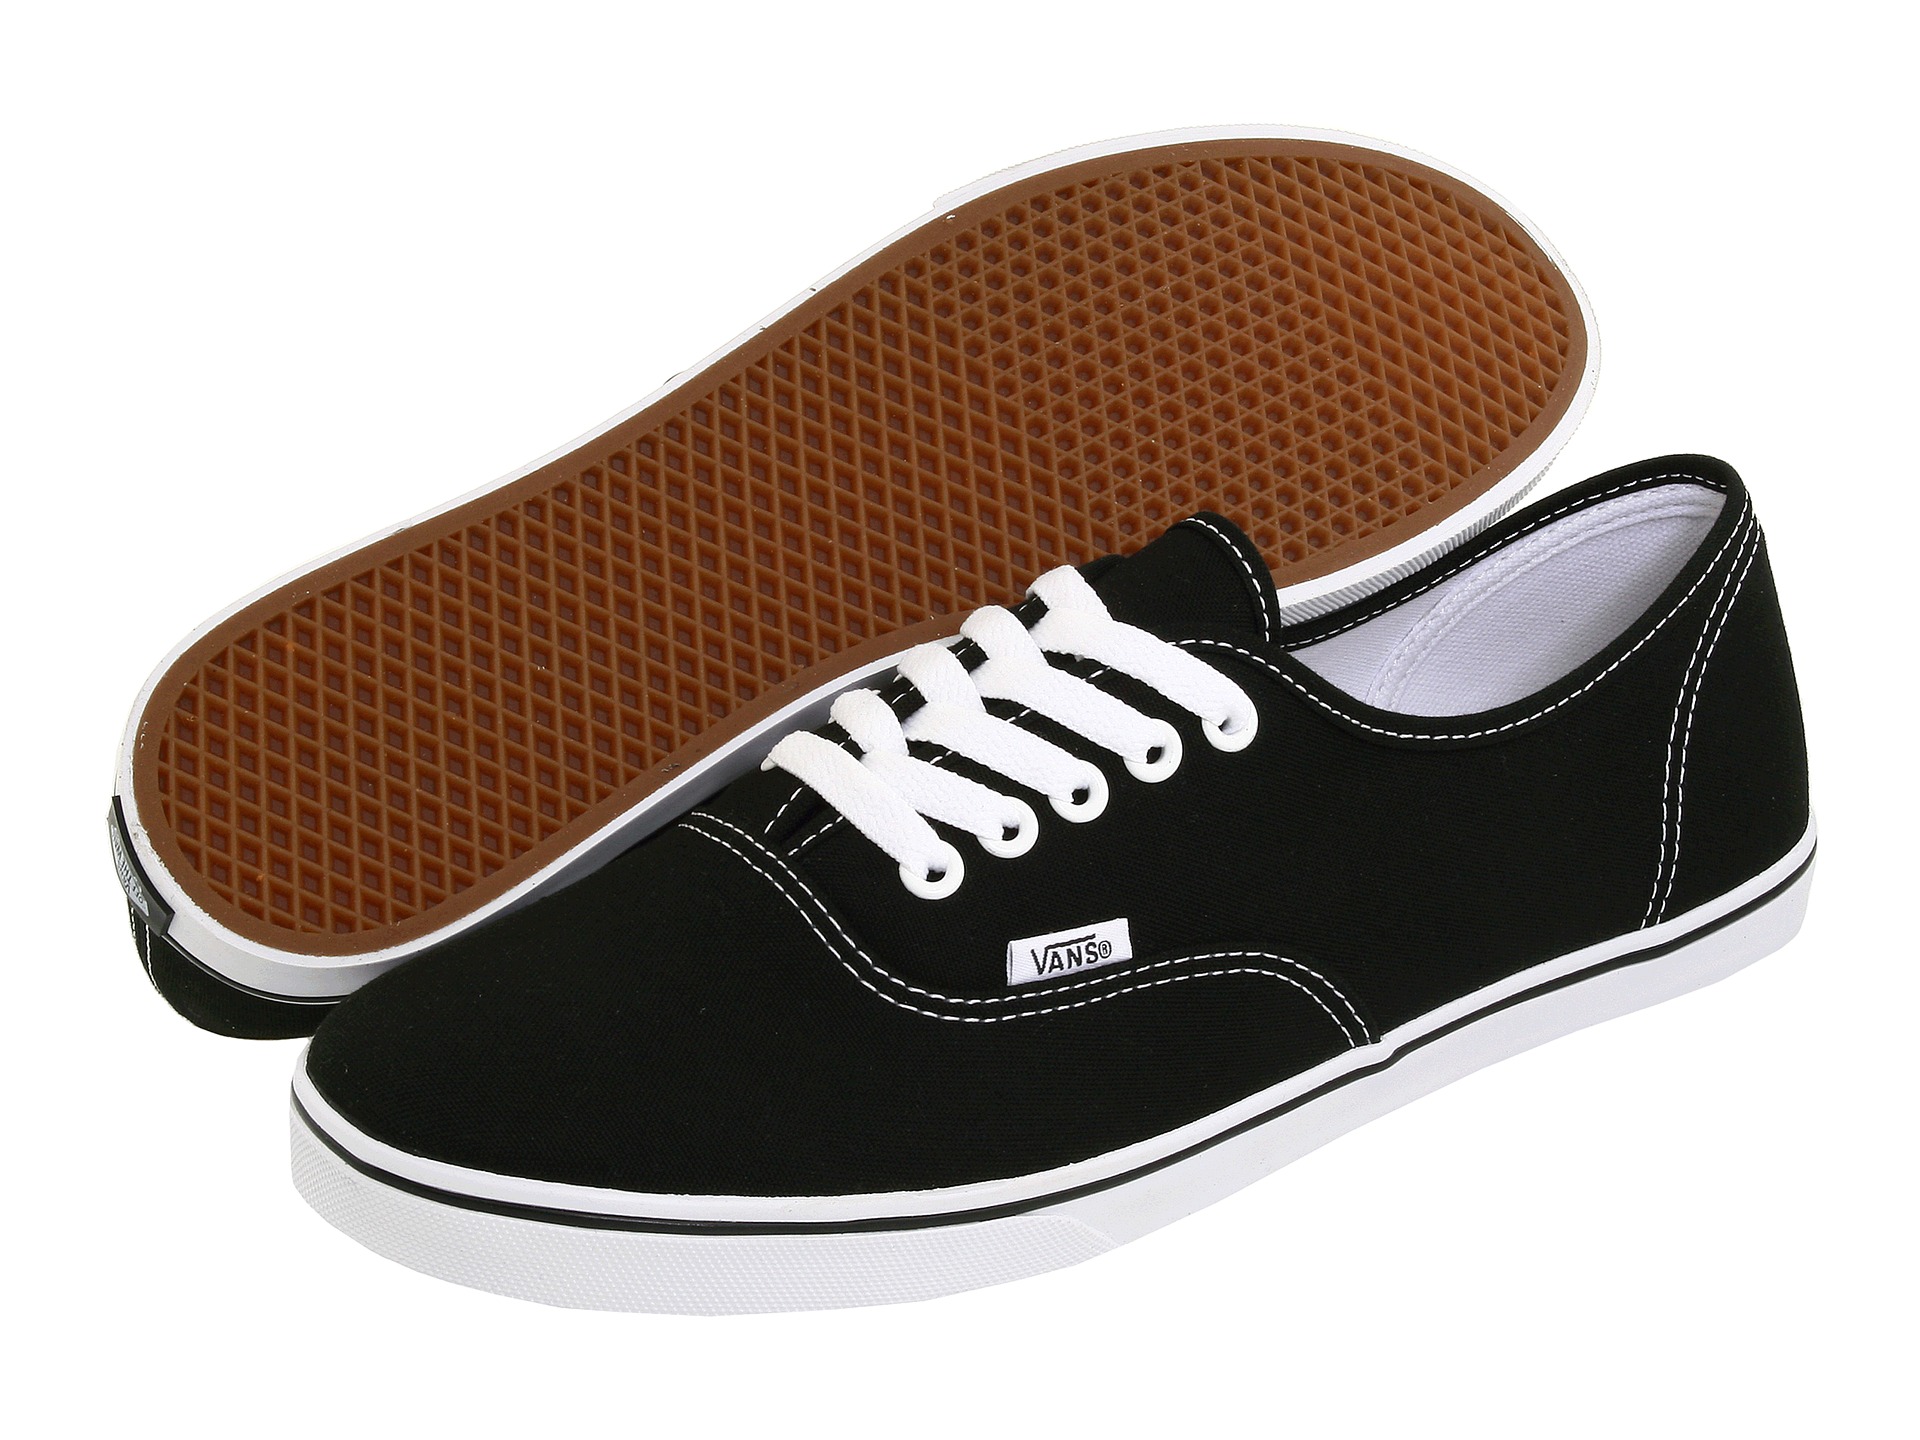 Vans Authentic™ Lo Pro - Zappos.com Free Shipping BOTH Ways